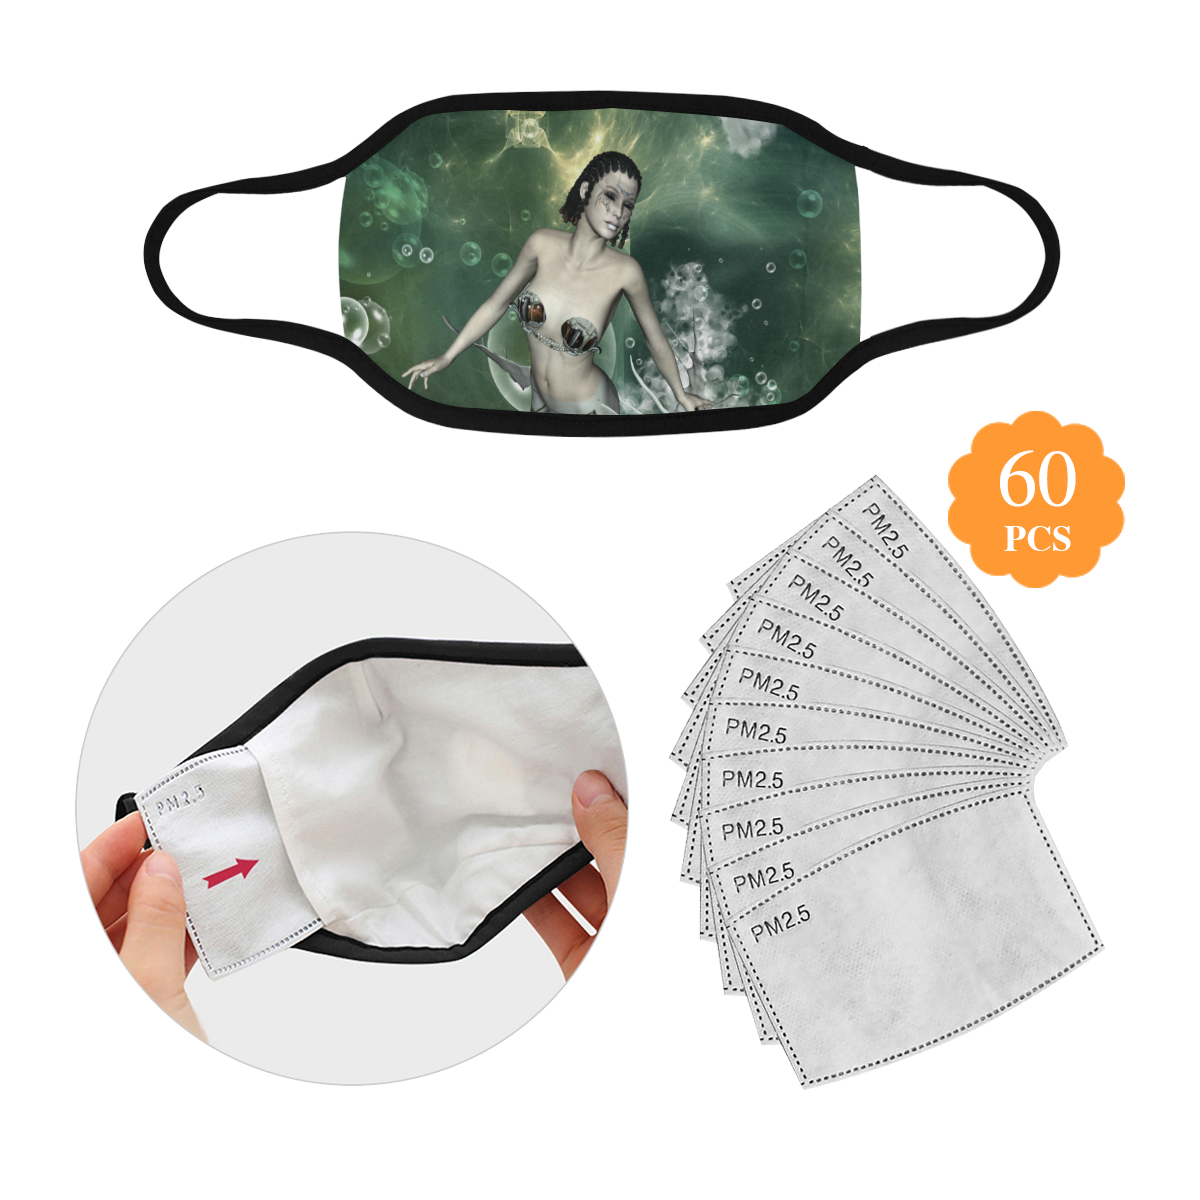 Awesome mermaid in the deep ocean Mouth Mask (60 Filters Included) (Non-medical Products)